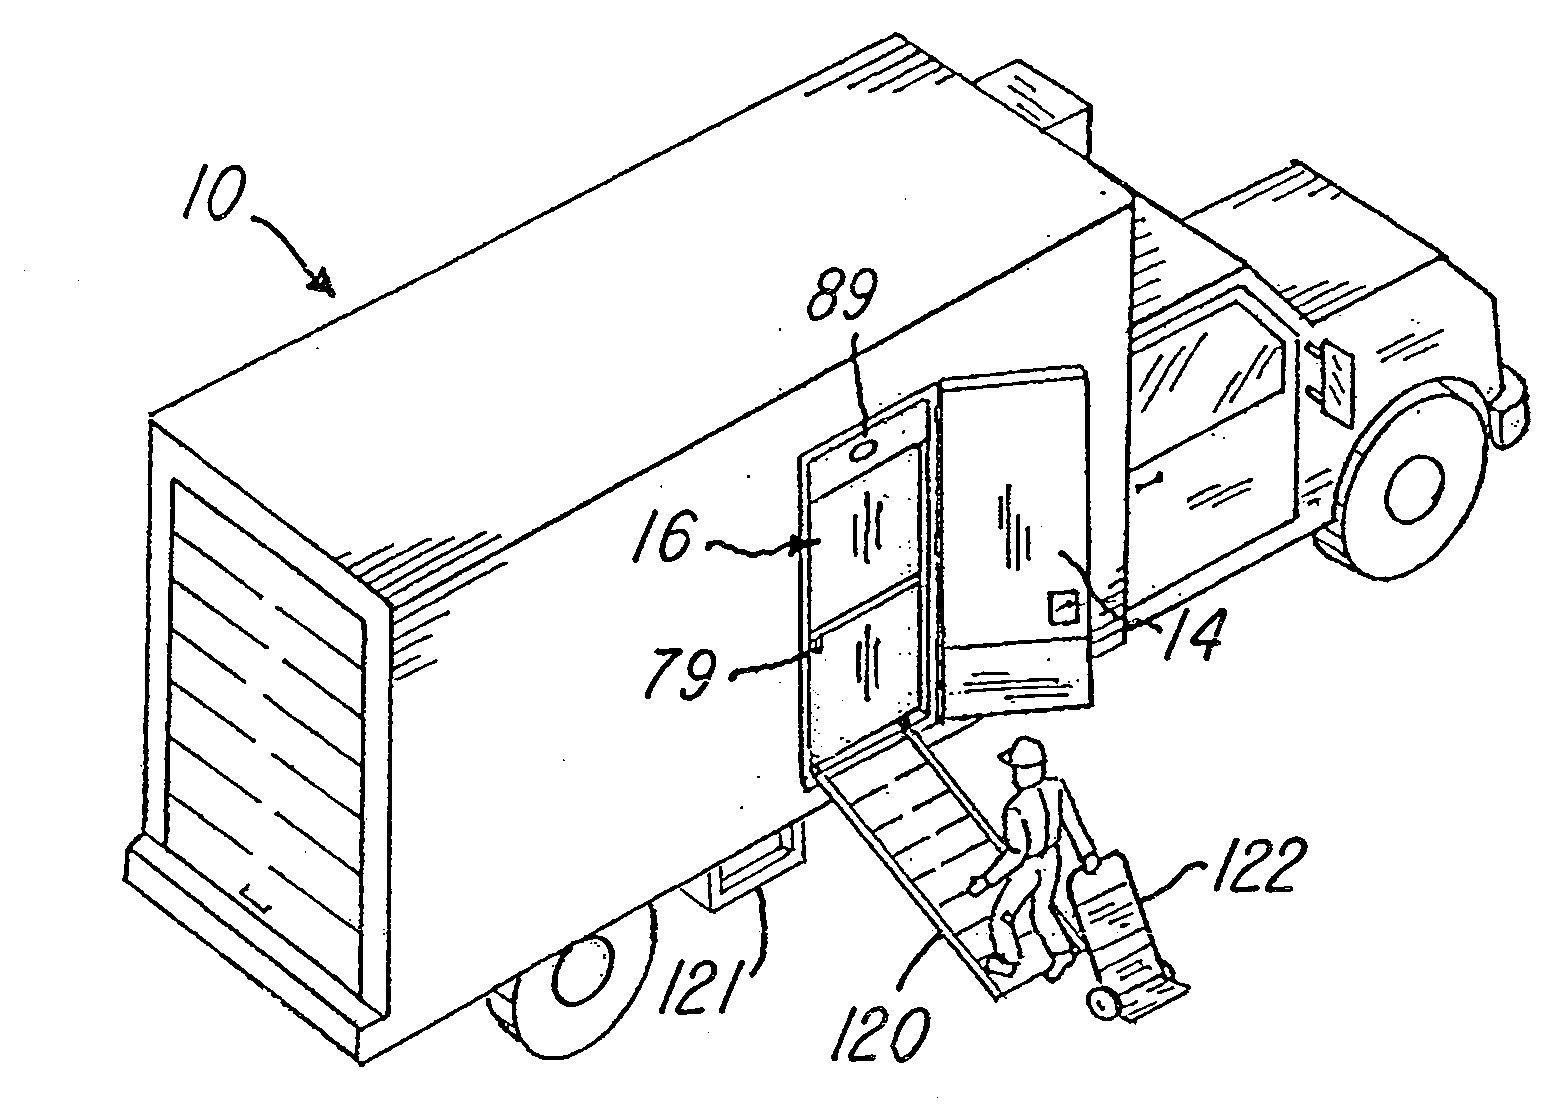 Secondary door and temperature control system and method